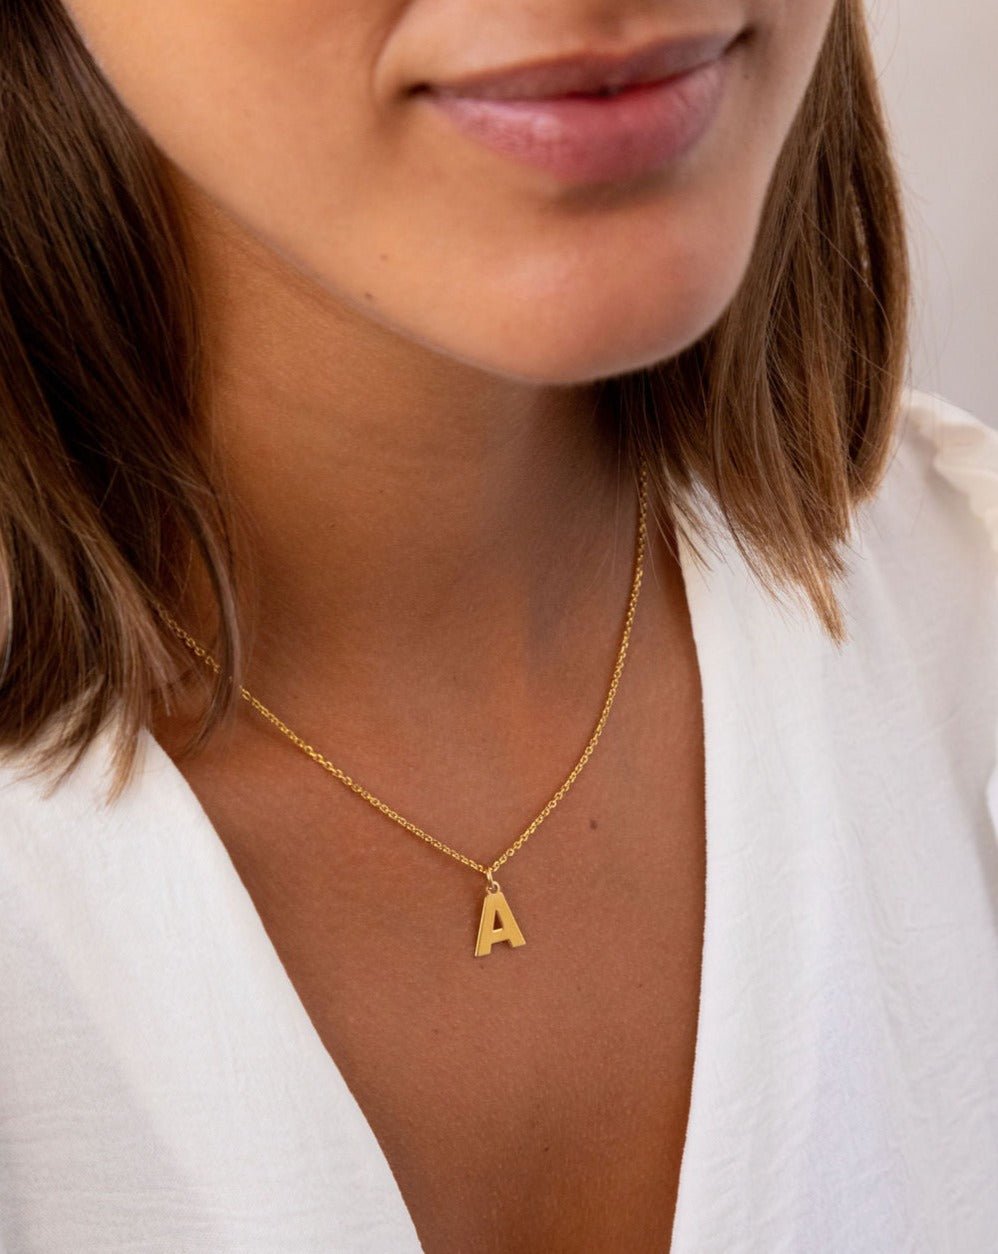 GOLD MIDI INITIAL NECKLACE